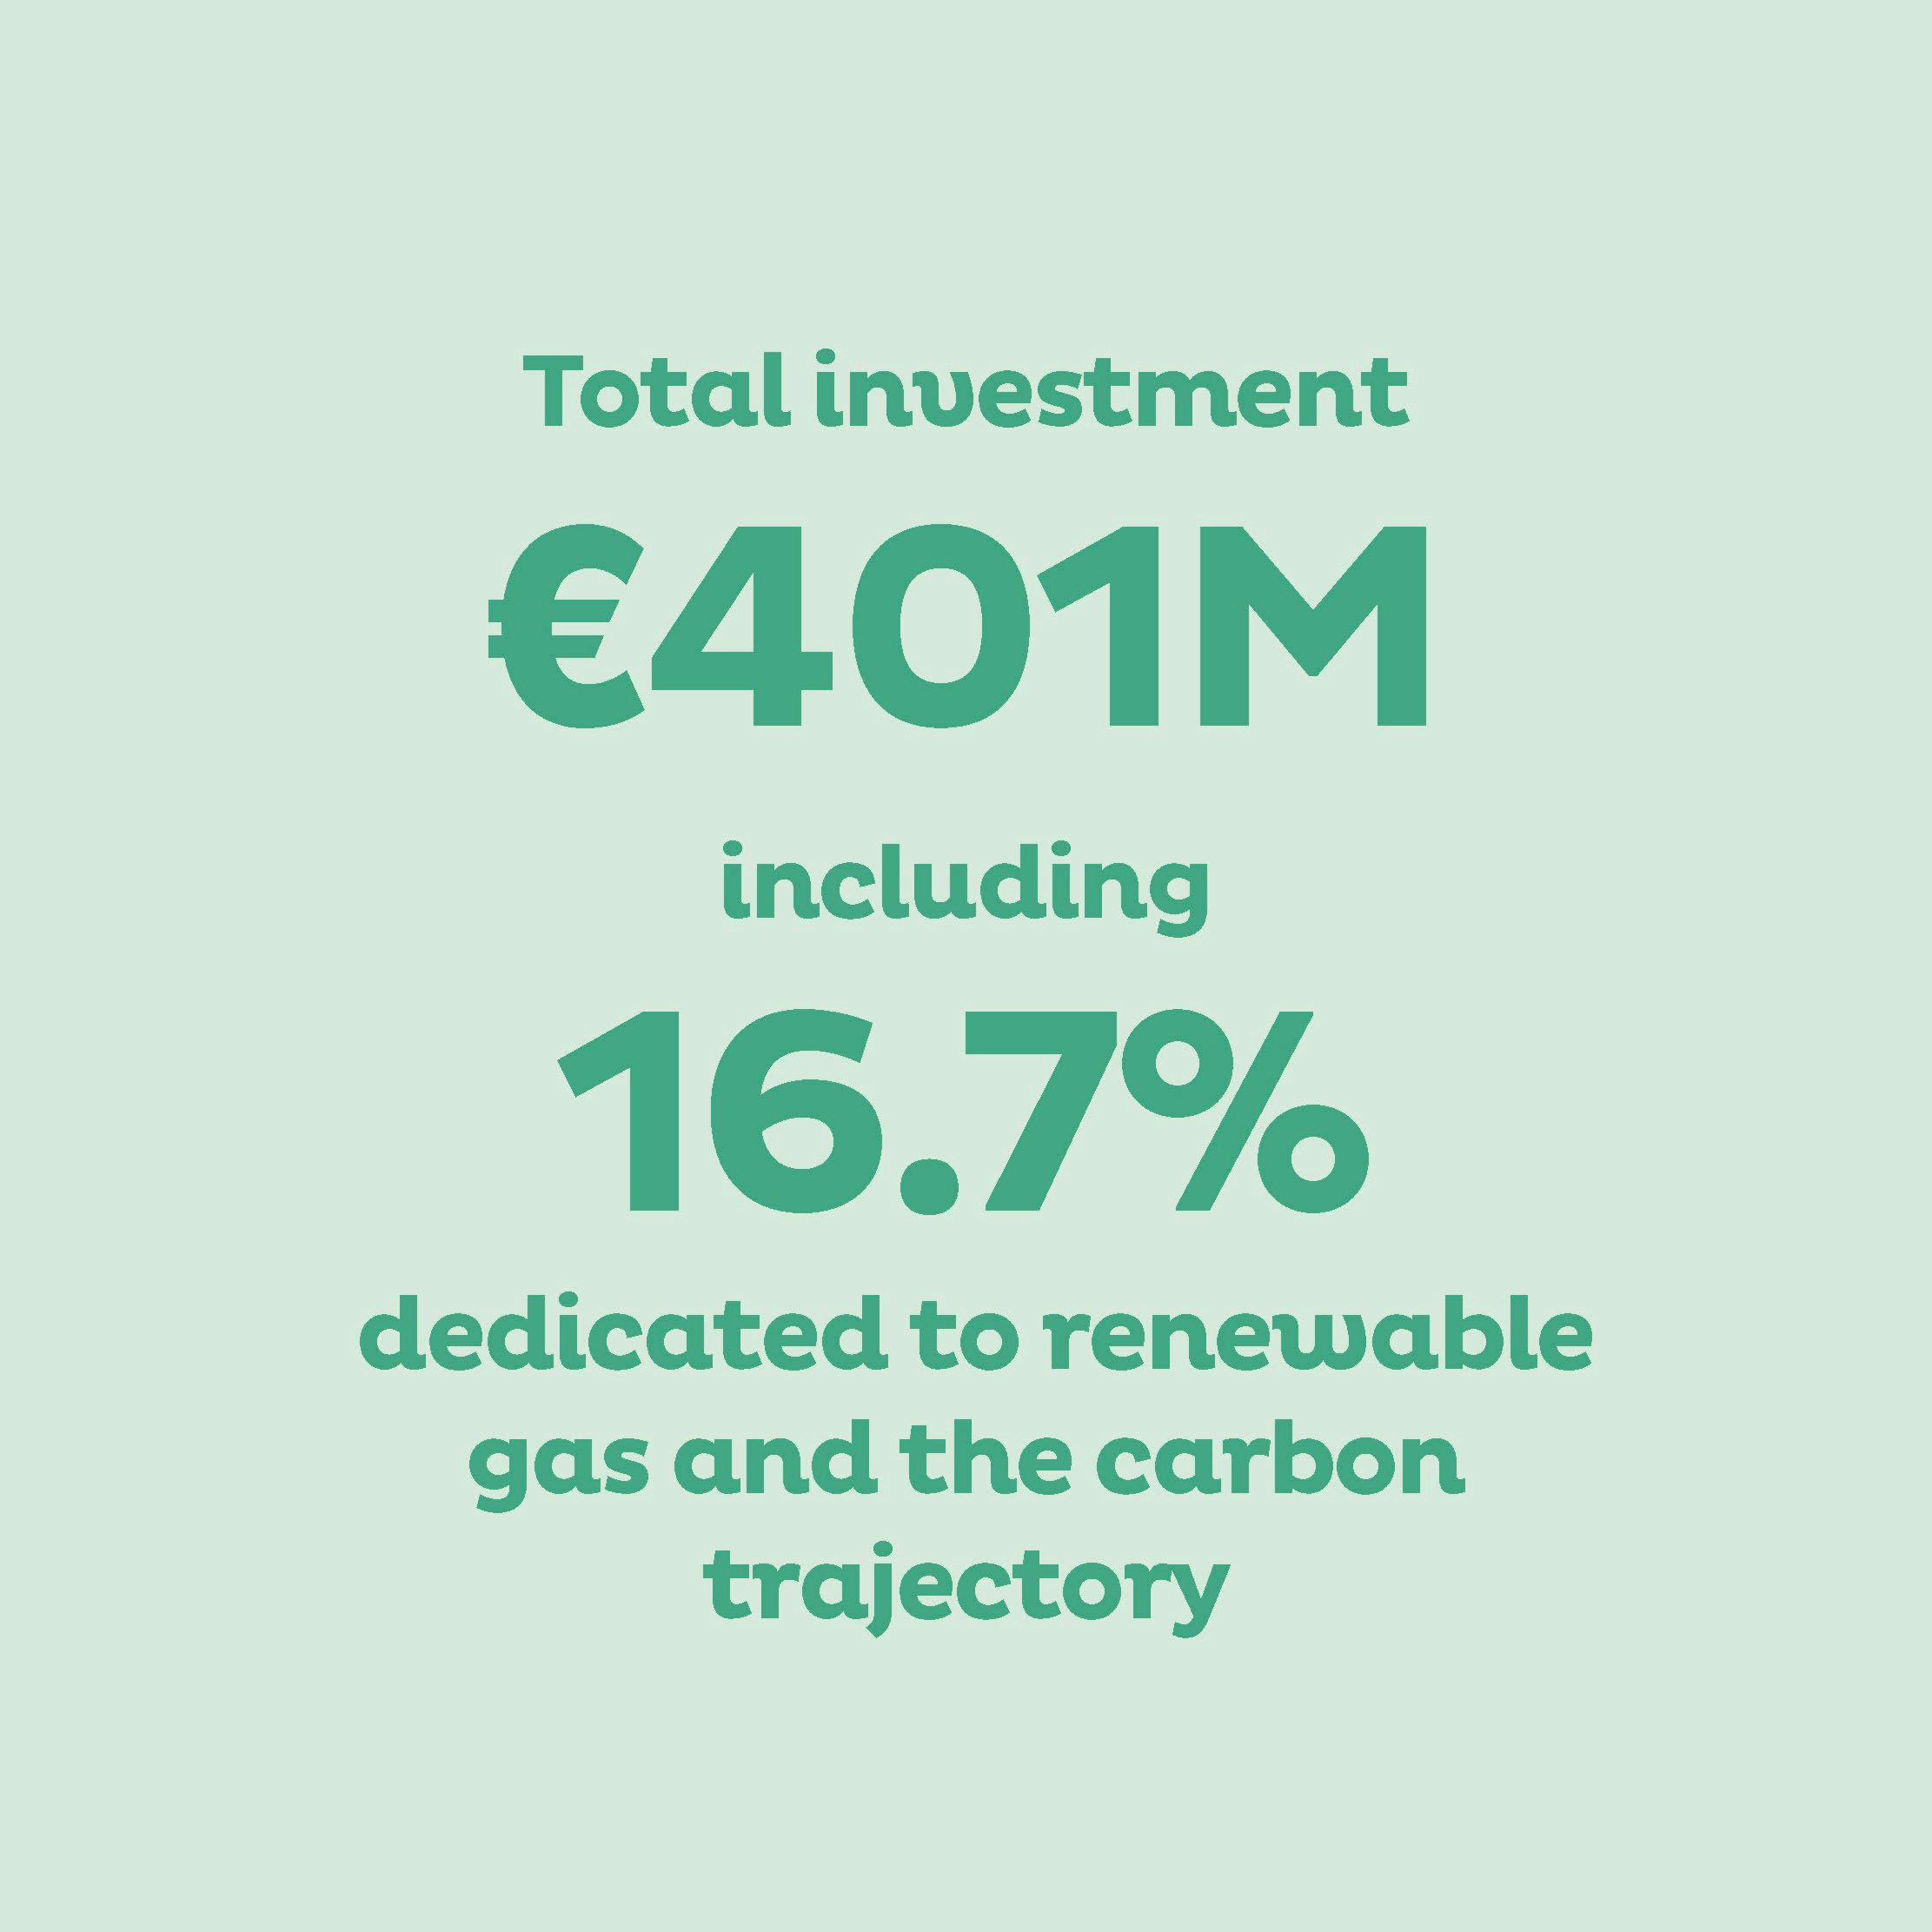 Total investment: €401M Including 16.7% dedicated to renewable gas and the carbon trajectory